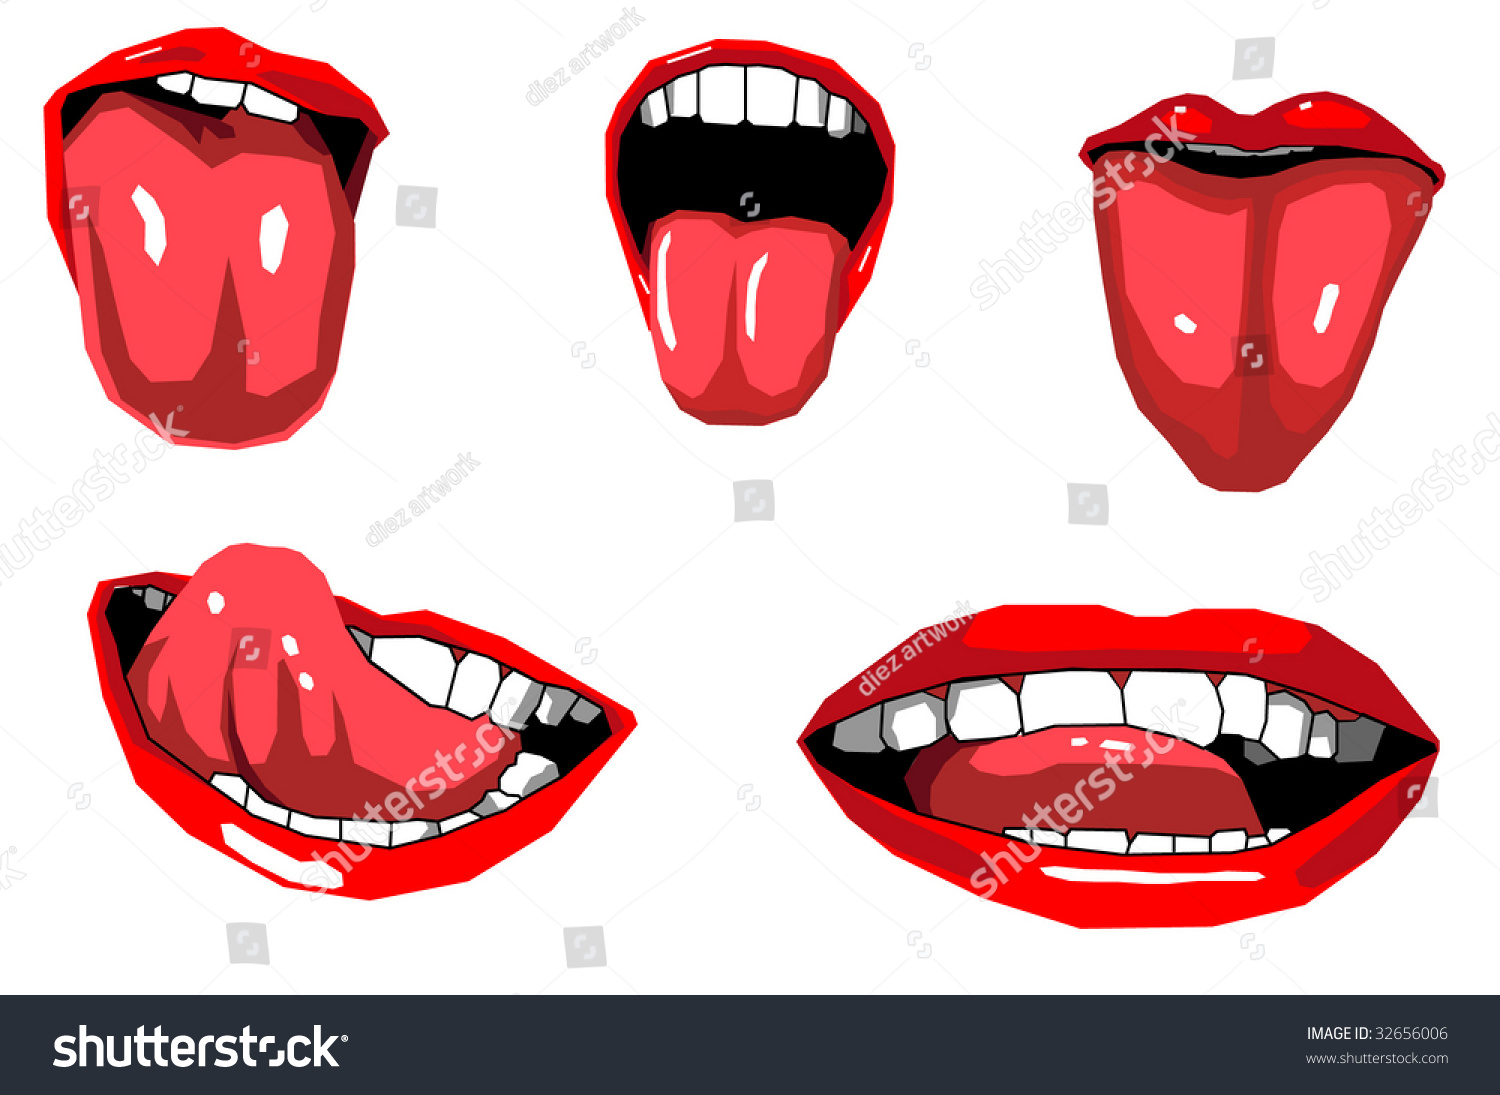 clipart licking lips - photo #47